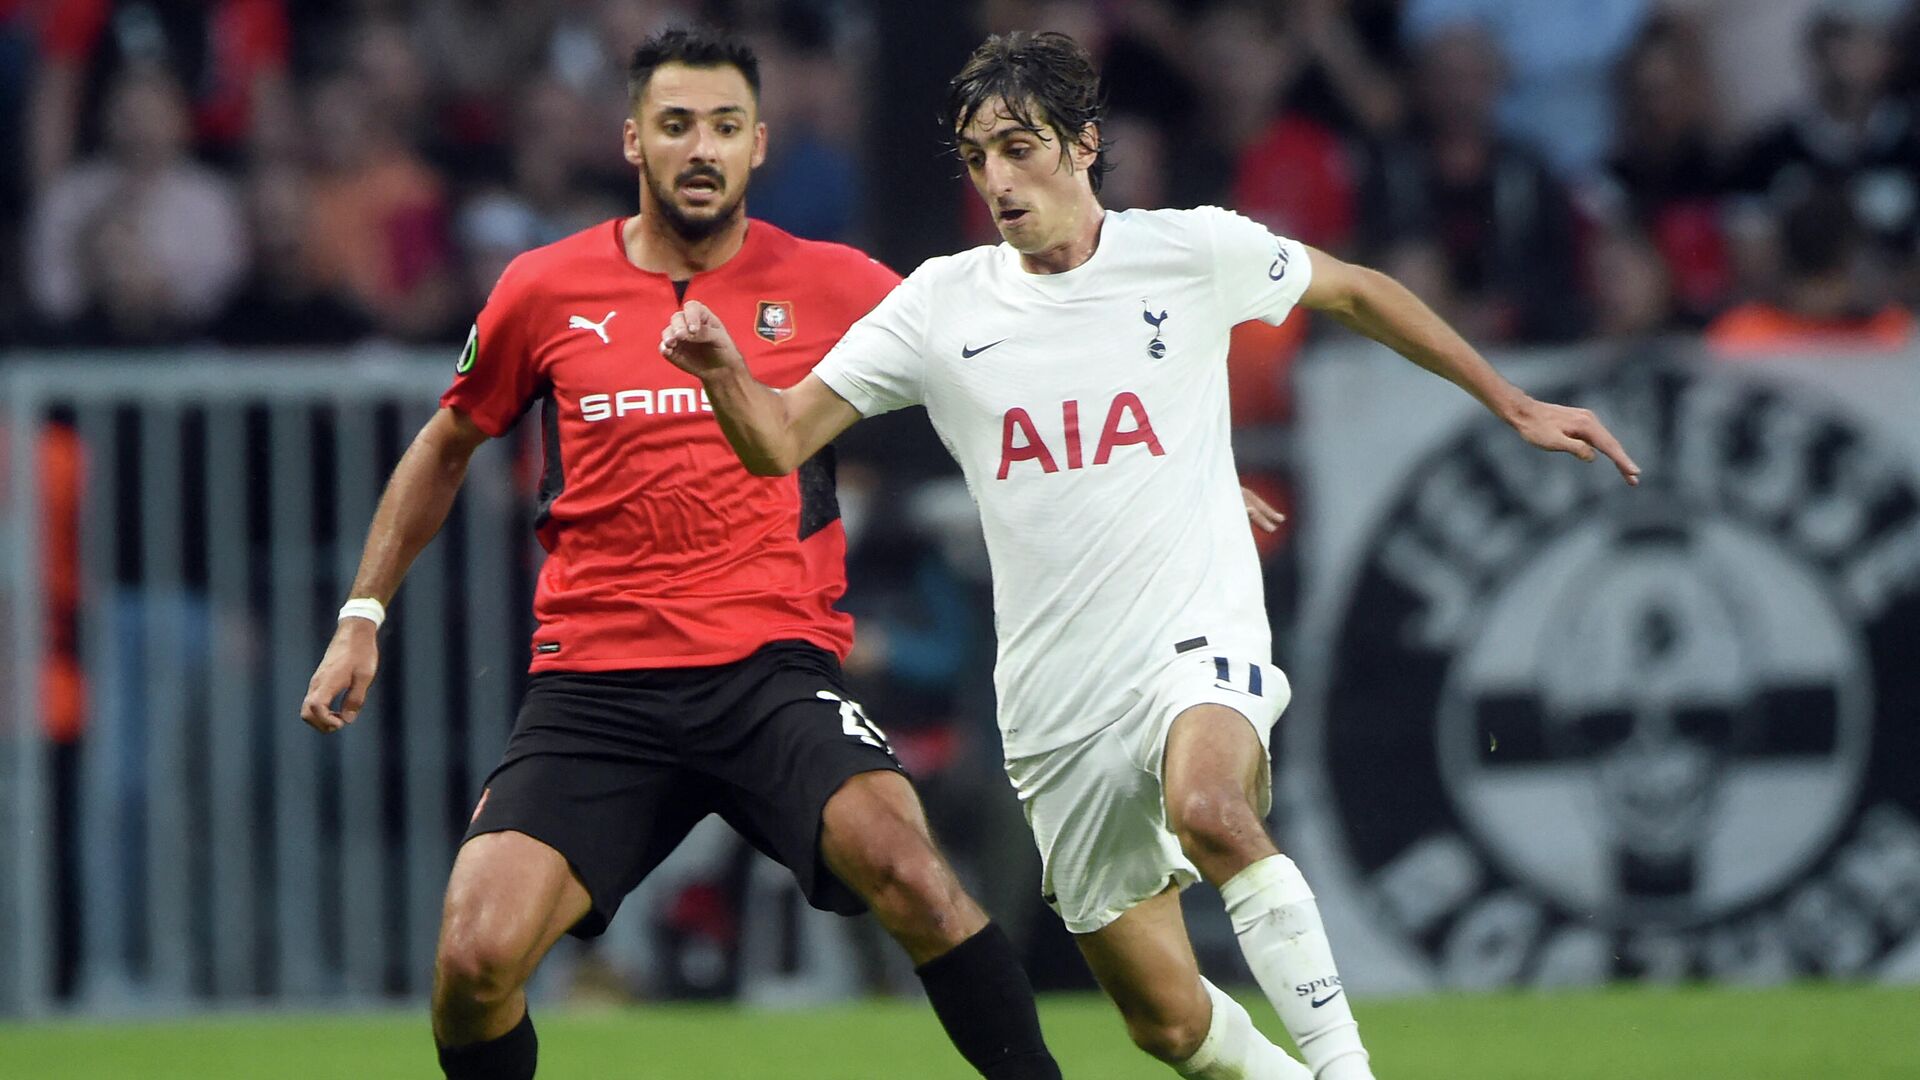 Rennes' French forward Gaetan Laborde (L) fights for the ball with Tottenham's Spanish forward Bryan Gil  during the UEFA Europa Conference League Group G football match between Stade Rennais Football Club (Rennes) and Tottenham at The Roazhon Park Stadium in Rennes, north-western France on September 16, 2021. (Photo by JEAN-FRANCOIS MONIER / AFP) - РИА Новости, 1920, 09.12.2021